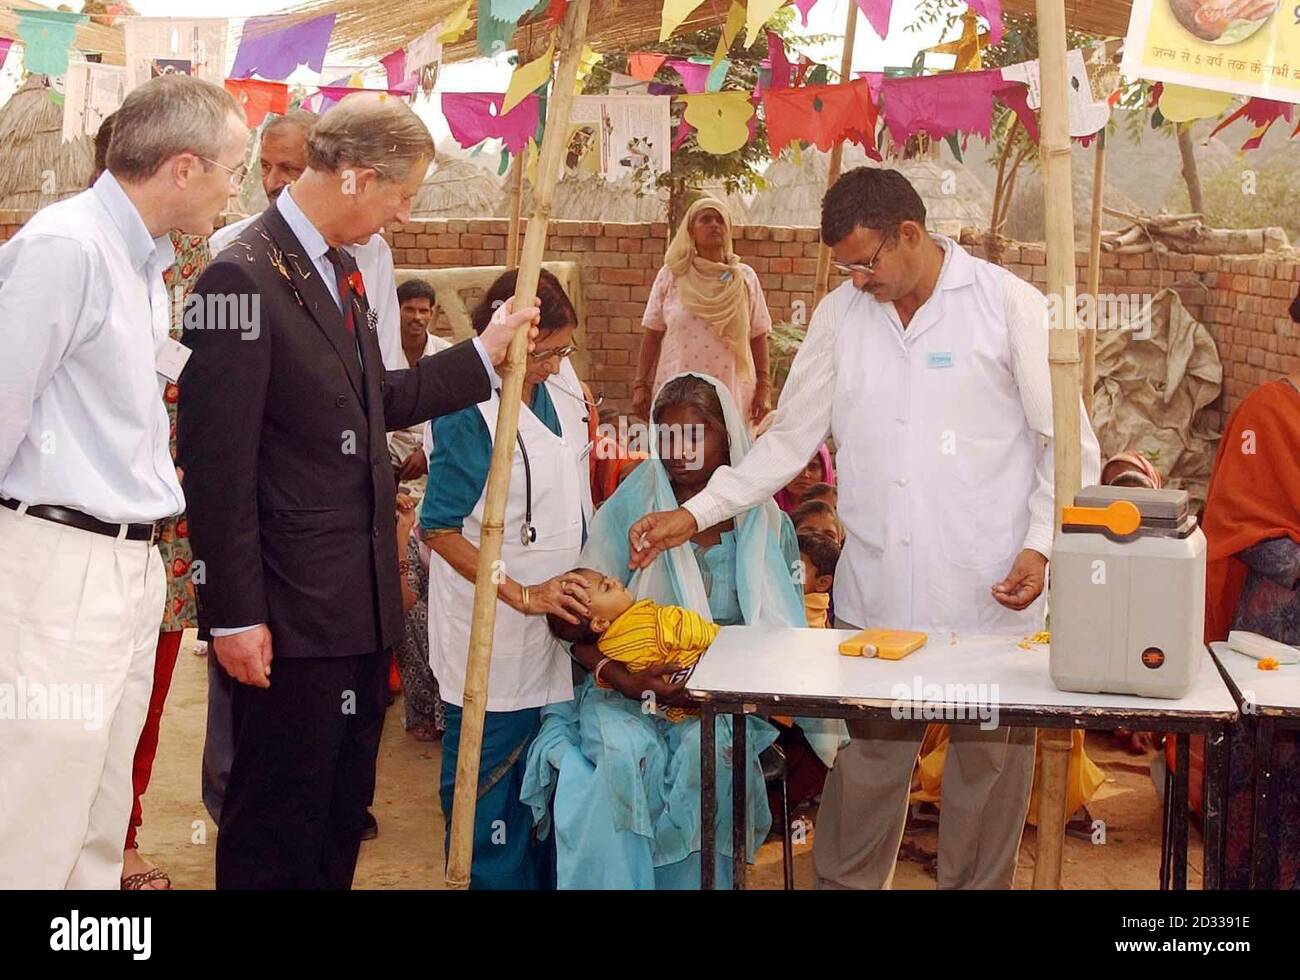 The Prince of Wales watches a child being vaccinated during a visit to Kutail Gamri village on the outskirts of Delhi. There he also saw the work of the Arpana Trust UK, of which he is patron, which attempts to empower poor and low caste women.... ... and has set up daycare services for children and antenatal clinics in the village. Stock Photo